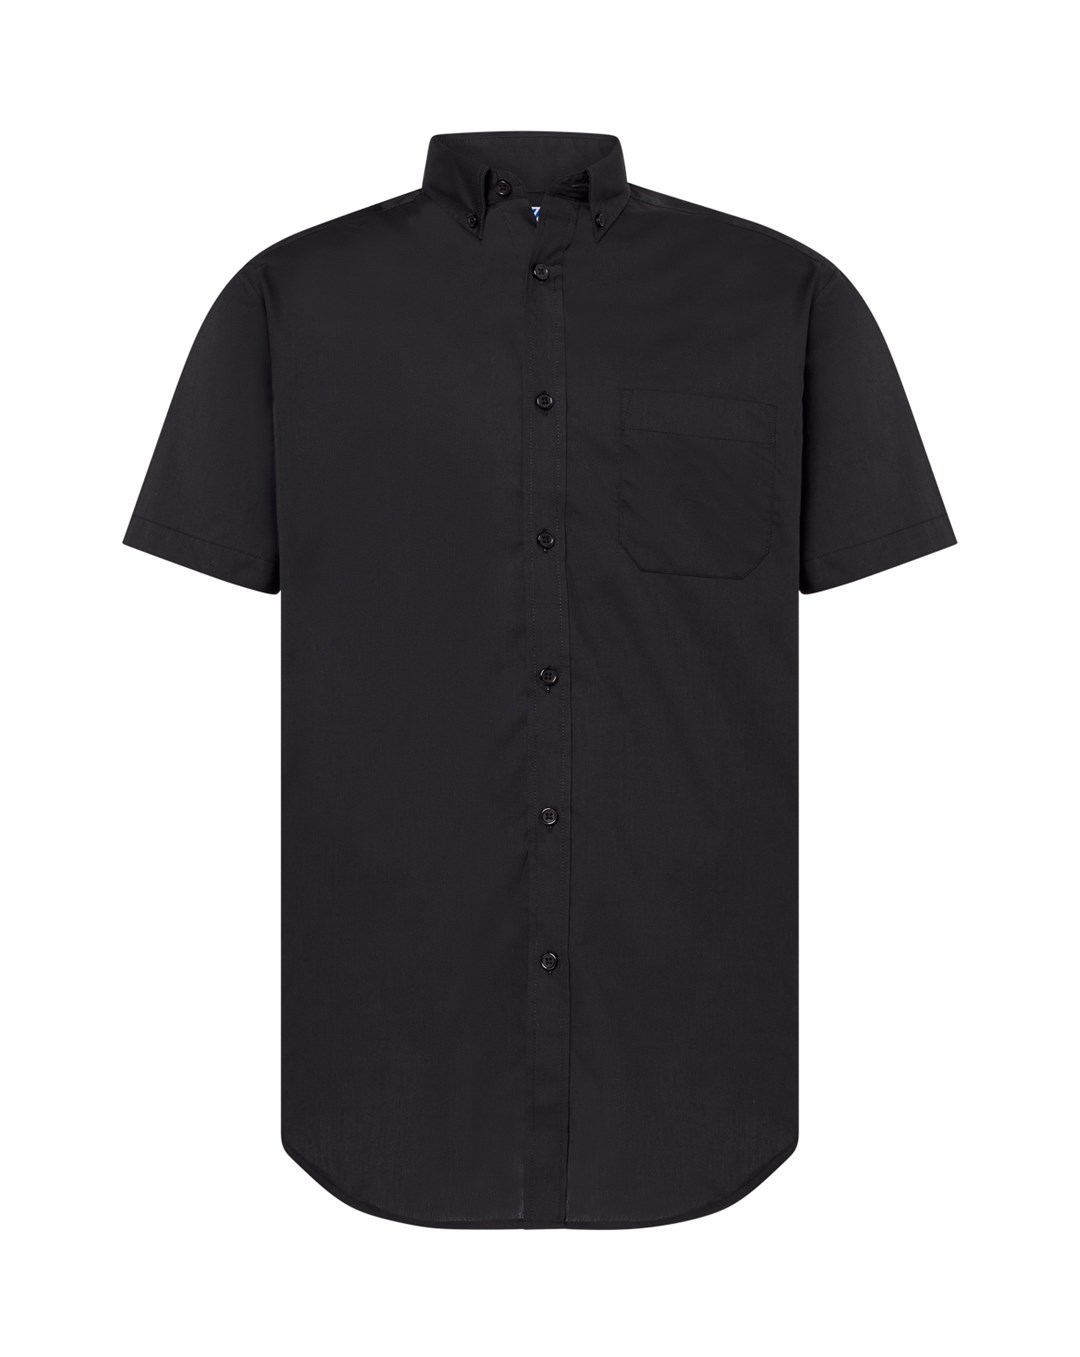 Formal shirt for men with short sleeves